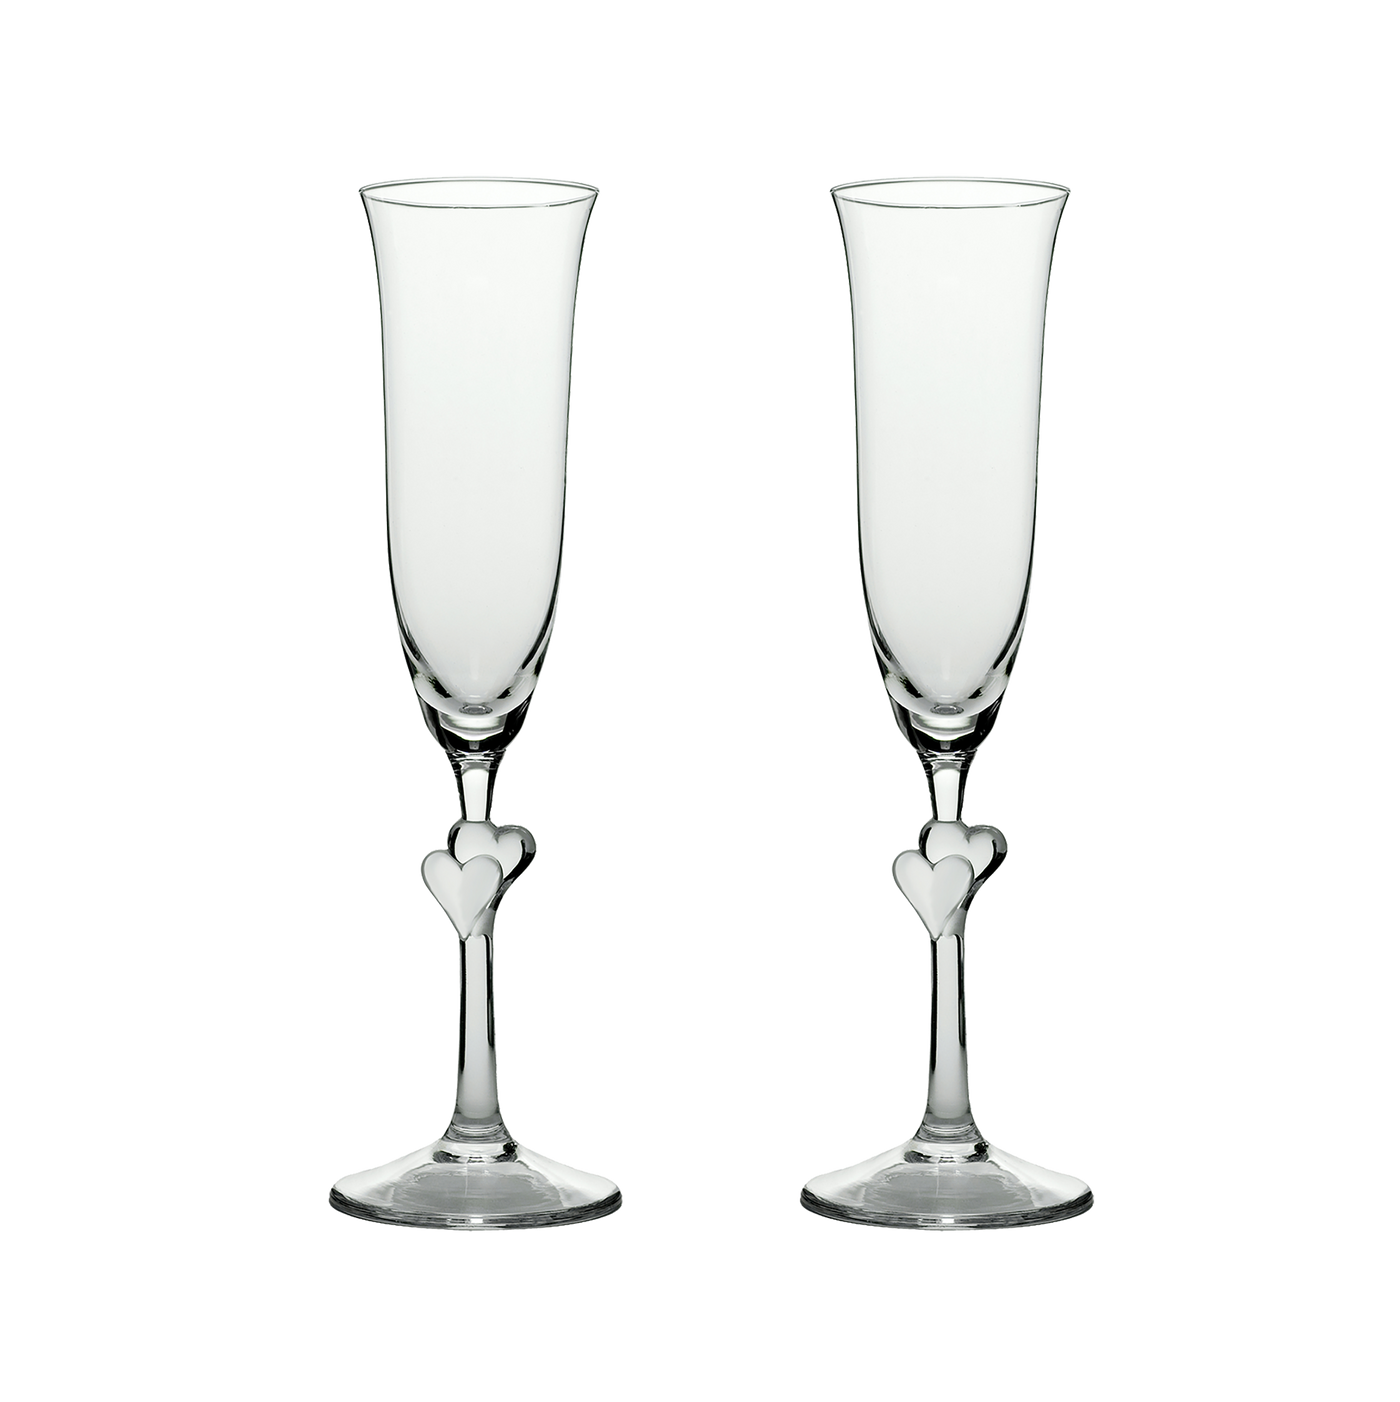 L'Amour Champagne Flute 6 oz - Set of two.